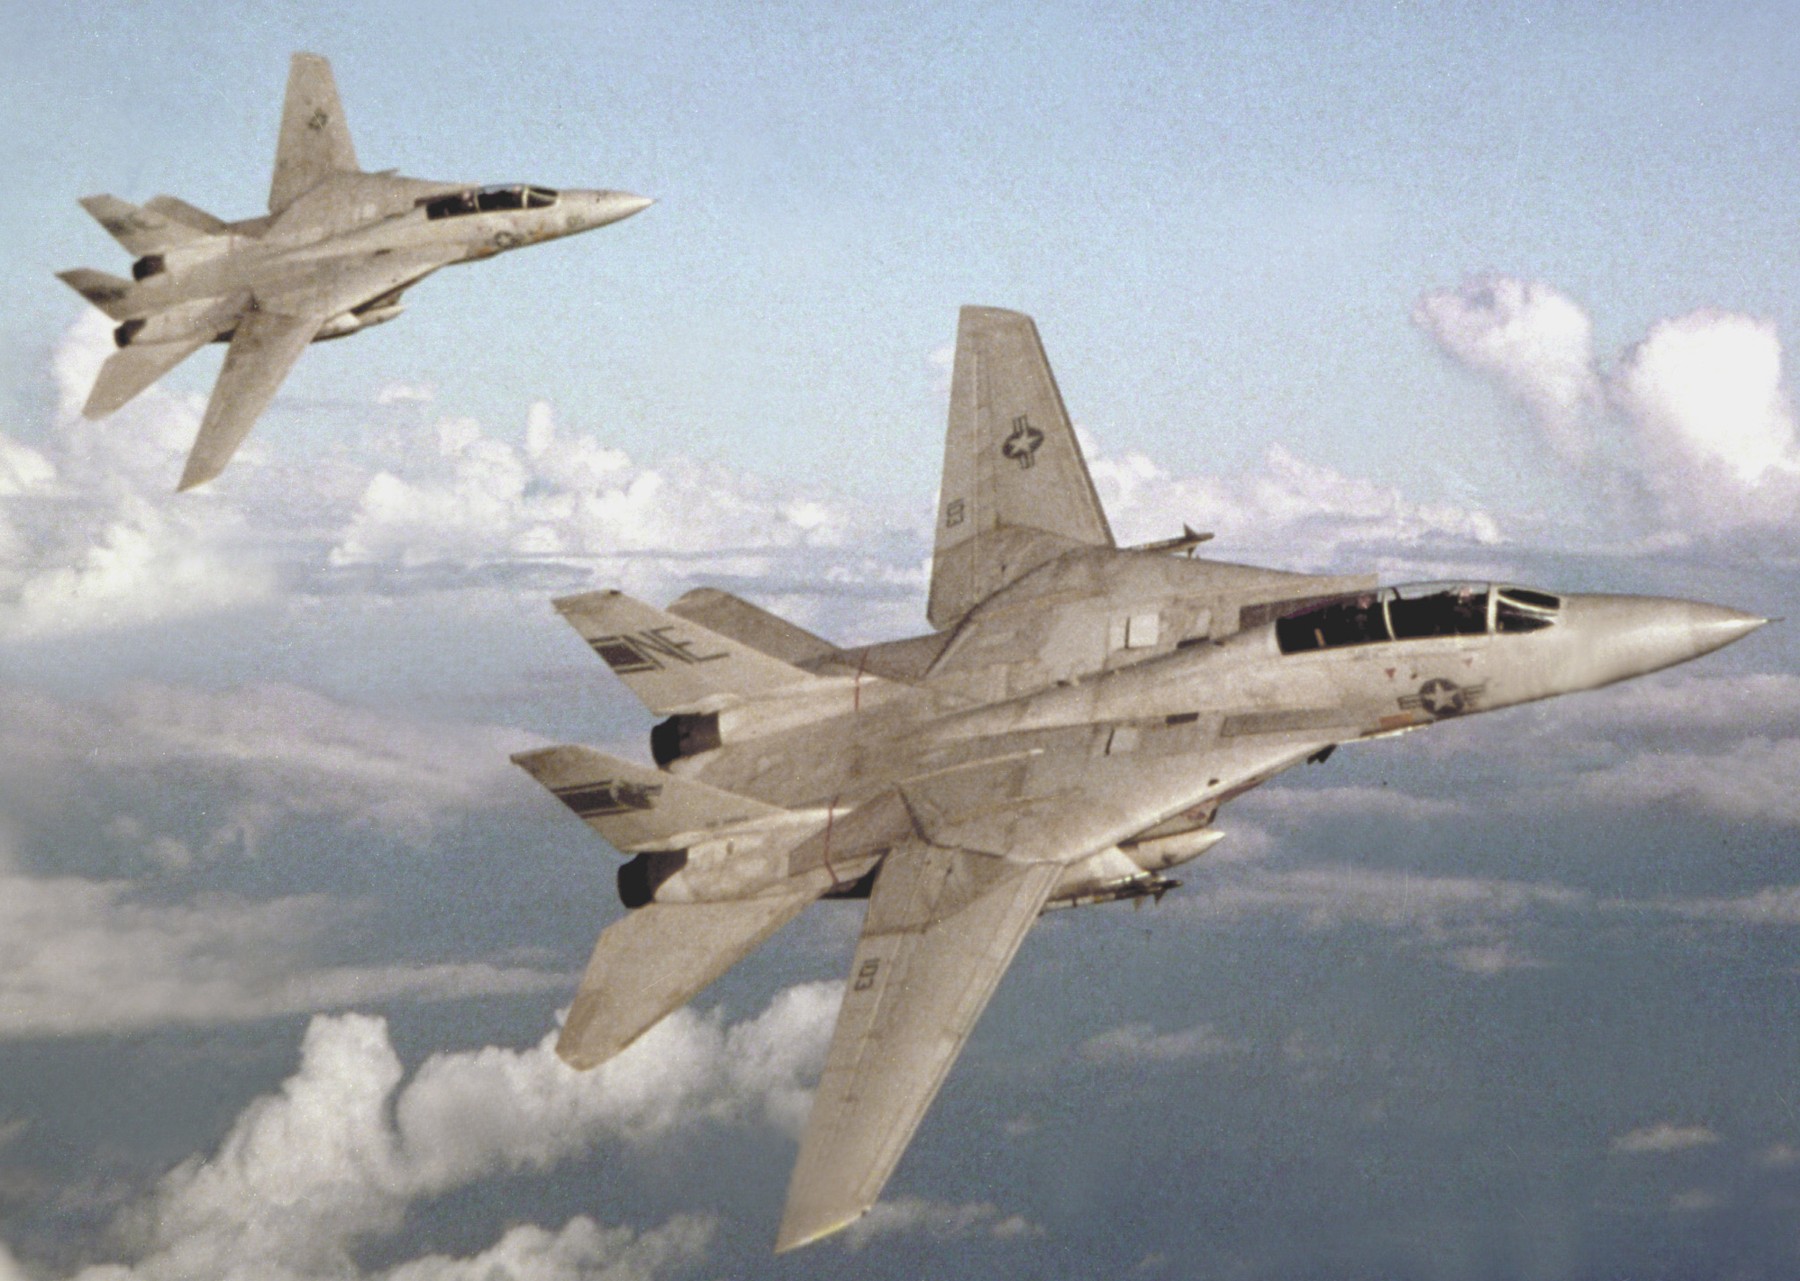 vf-1 wolfpack fighter squadron f-14a tomcat carrier air wing cvw-2 uss ranger cv-61 29